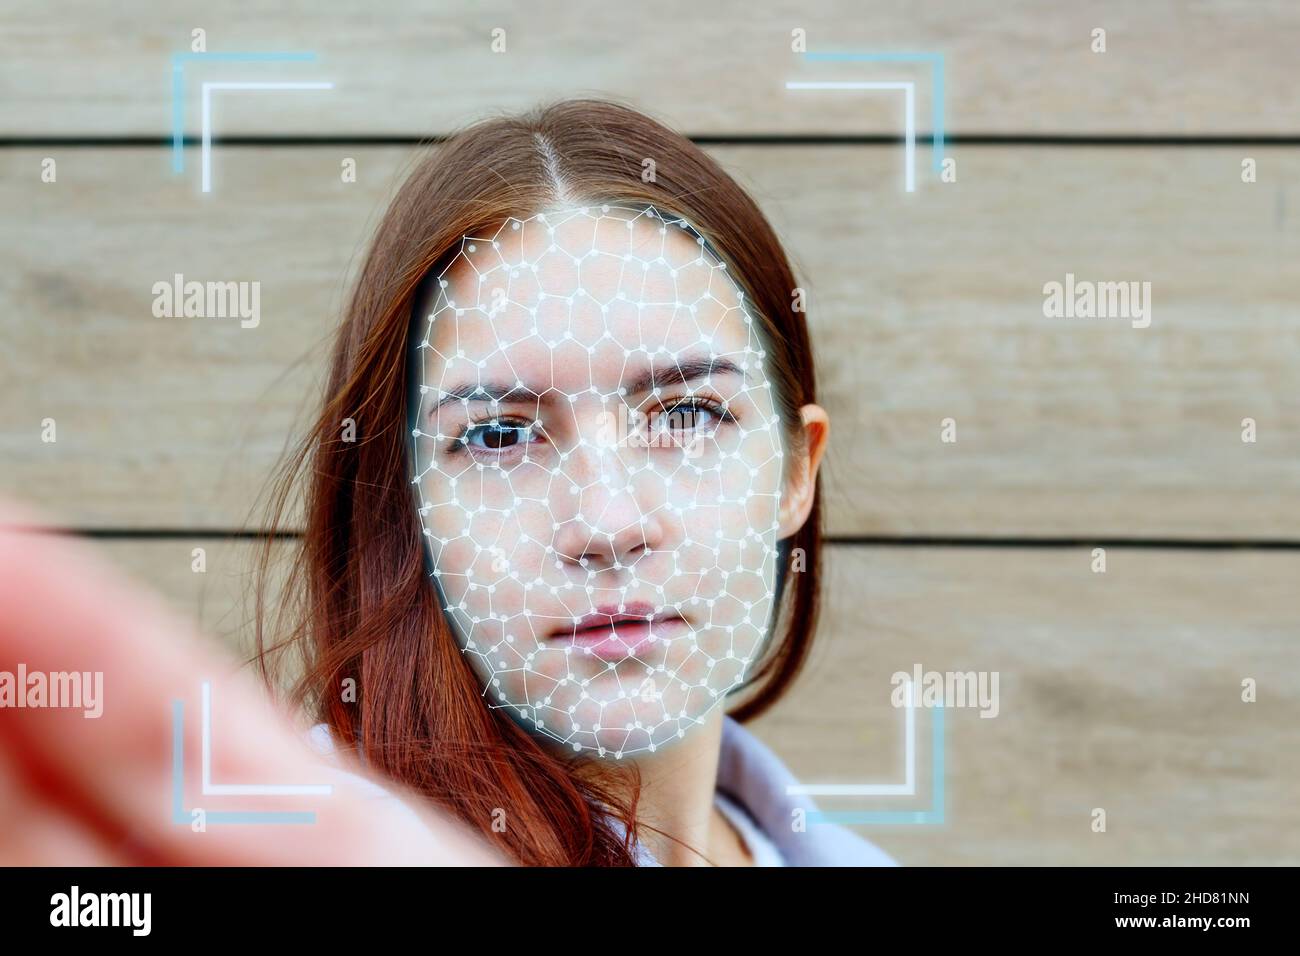 Young woman face during ai authentication biometrics. Stock Photo